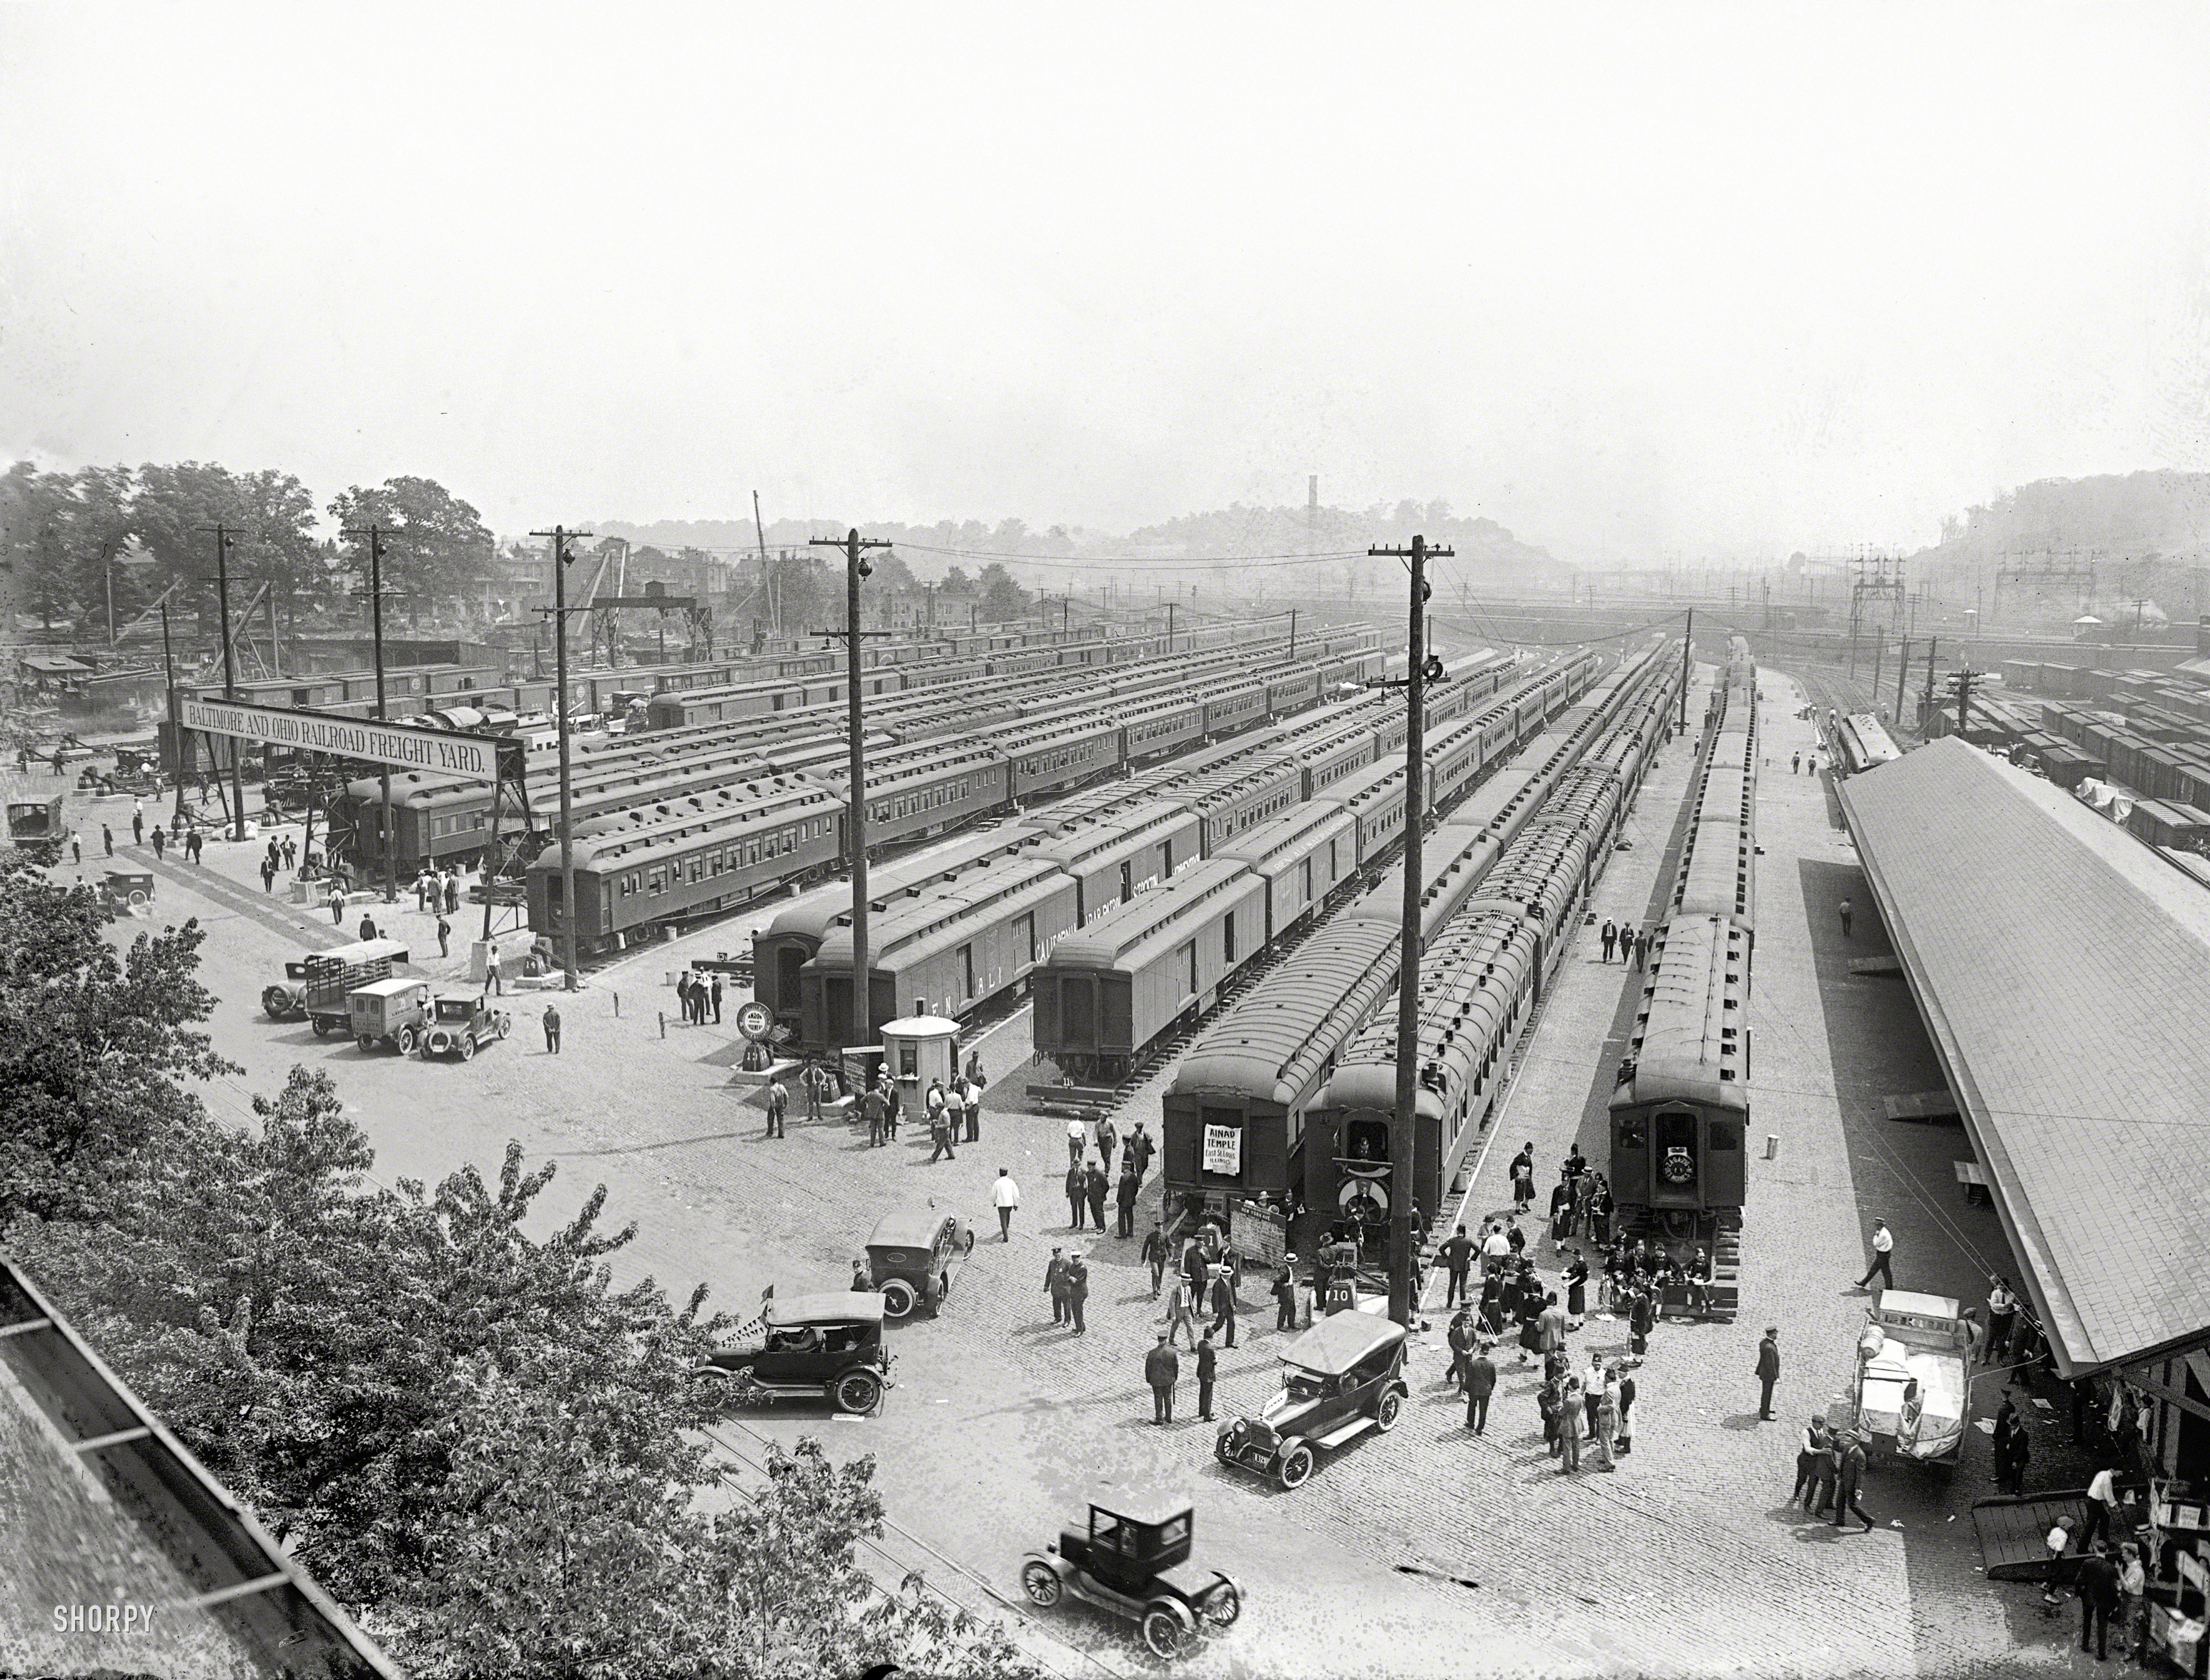 &nbsp; &nbsp; &nbsp; &nbsp; UPDATE: Click here for a better look at the big locomotive barely visible behind the freight yard sign.

"Eckington Yards, June 4, 1923." A rare and unusually detailed look at the Baltimore & Ohio rail yard in Washington, D.C., during that year's big gathering of Masonic lodges. National Photo Company glass negative. View full size.